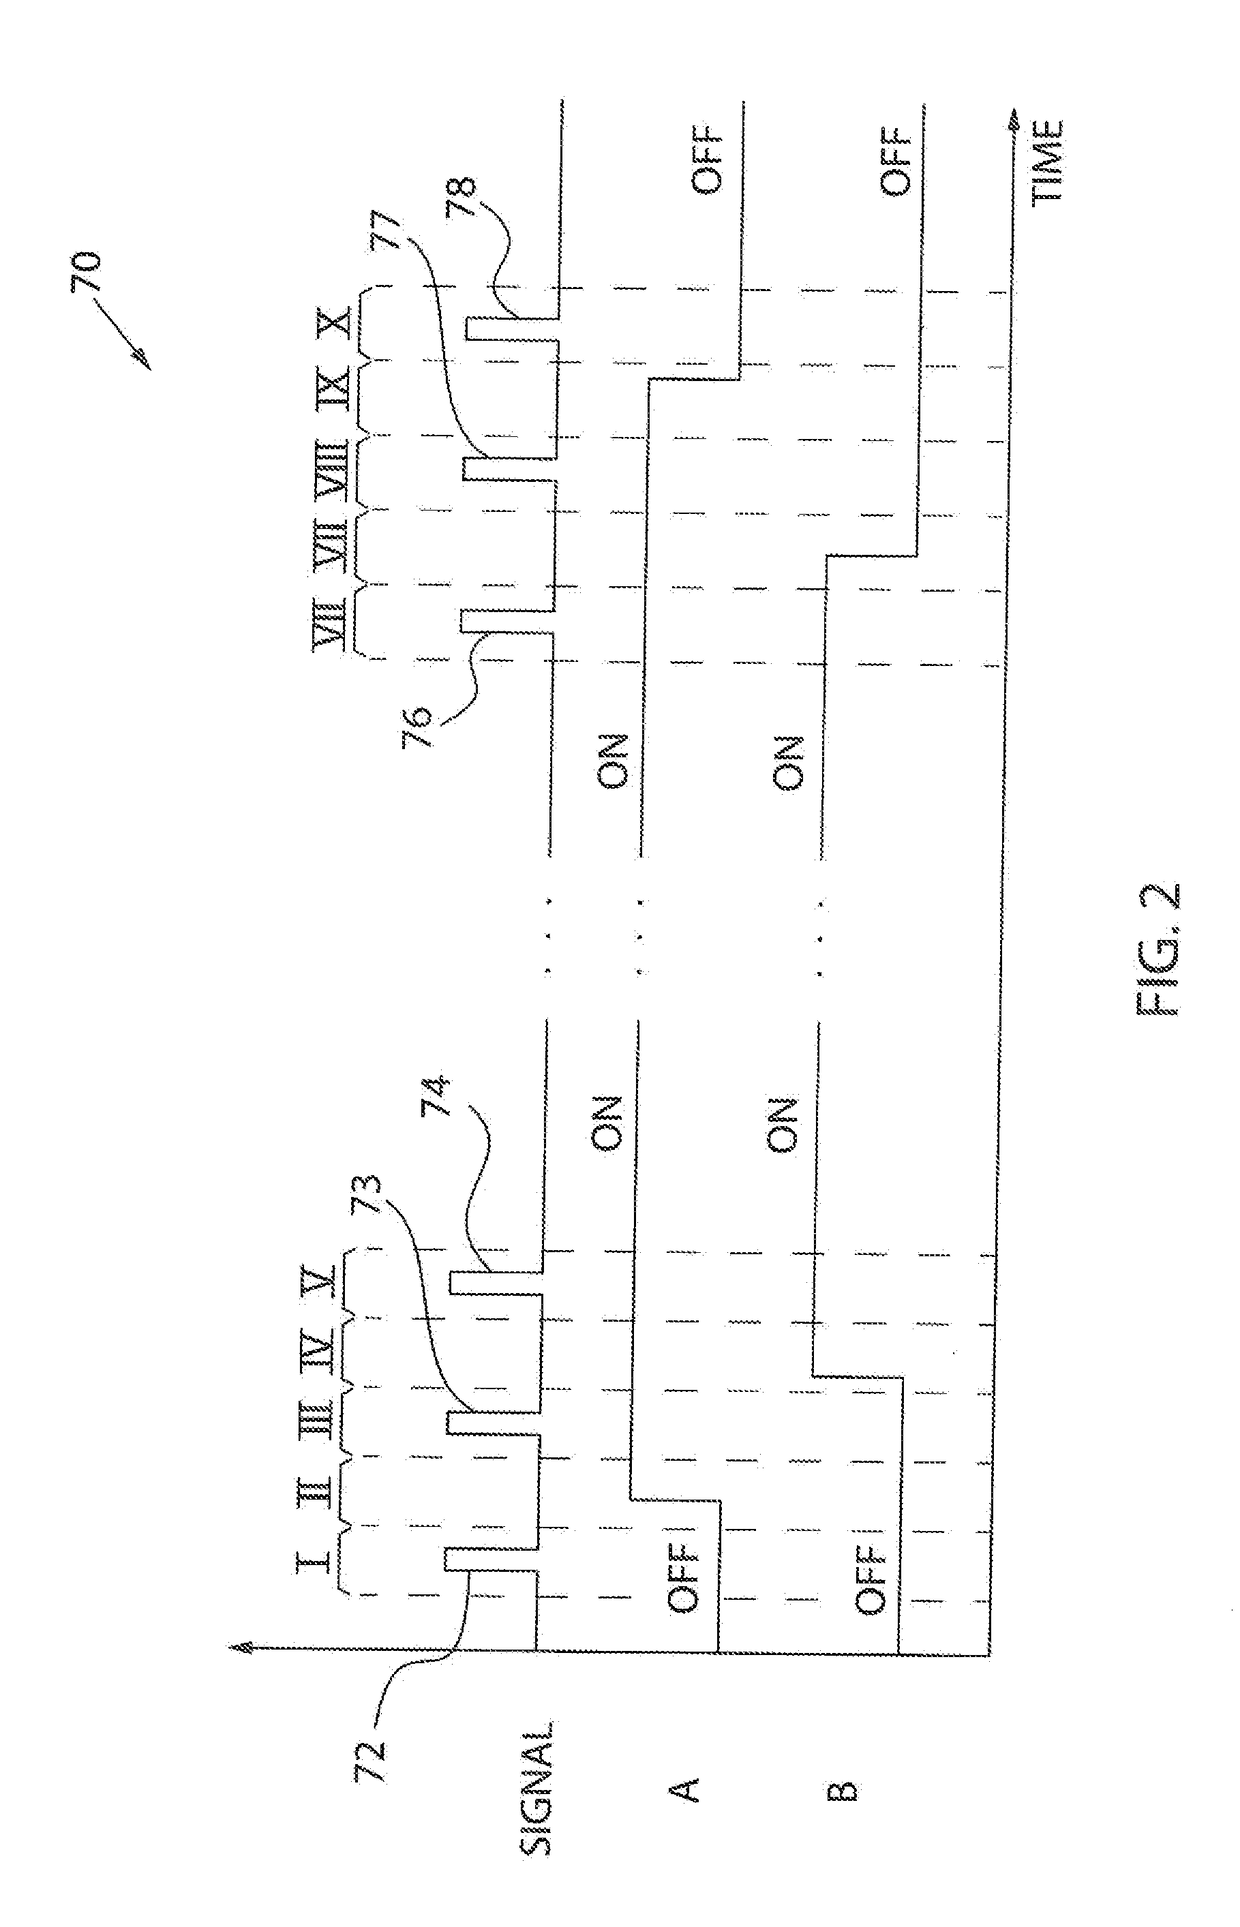 Electrical Relay System with Failure Detection